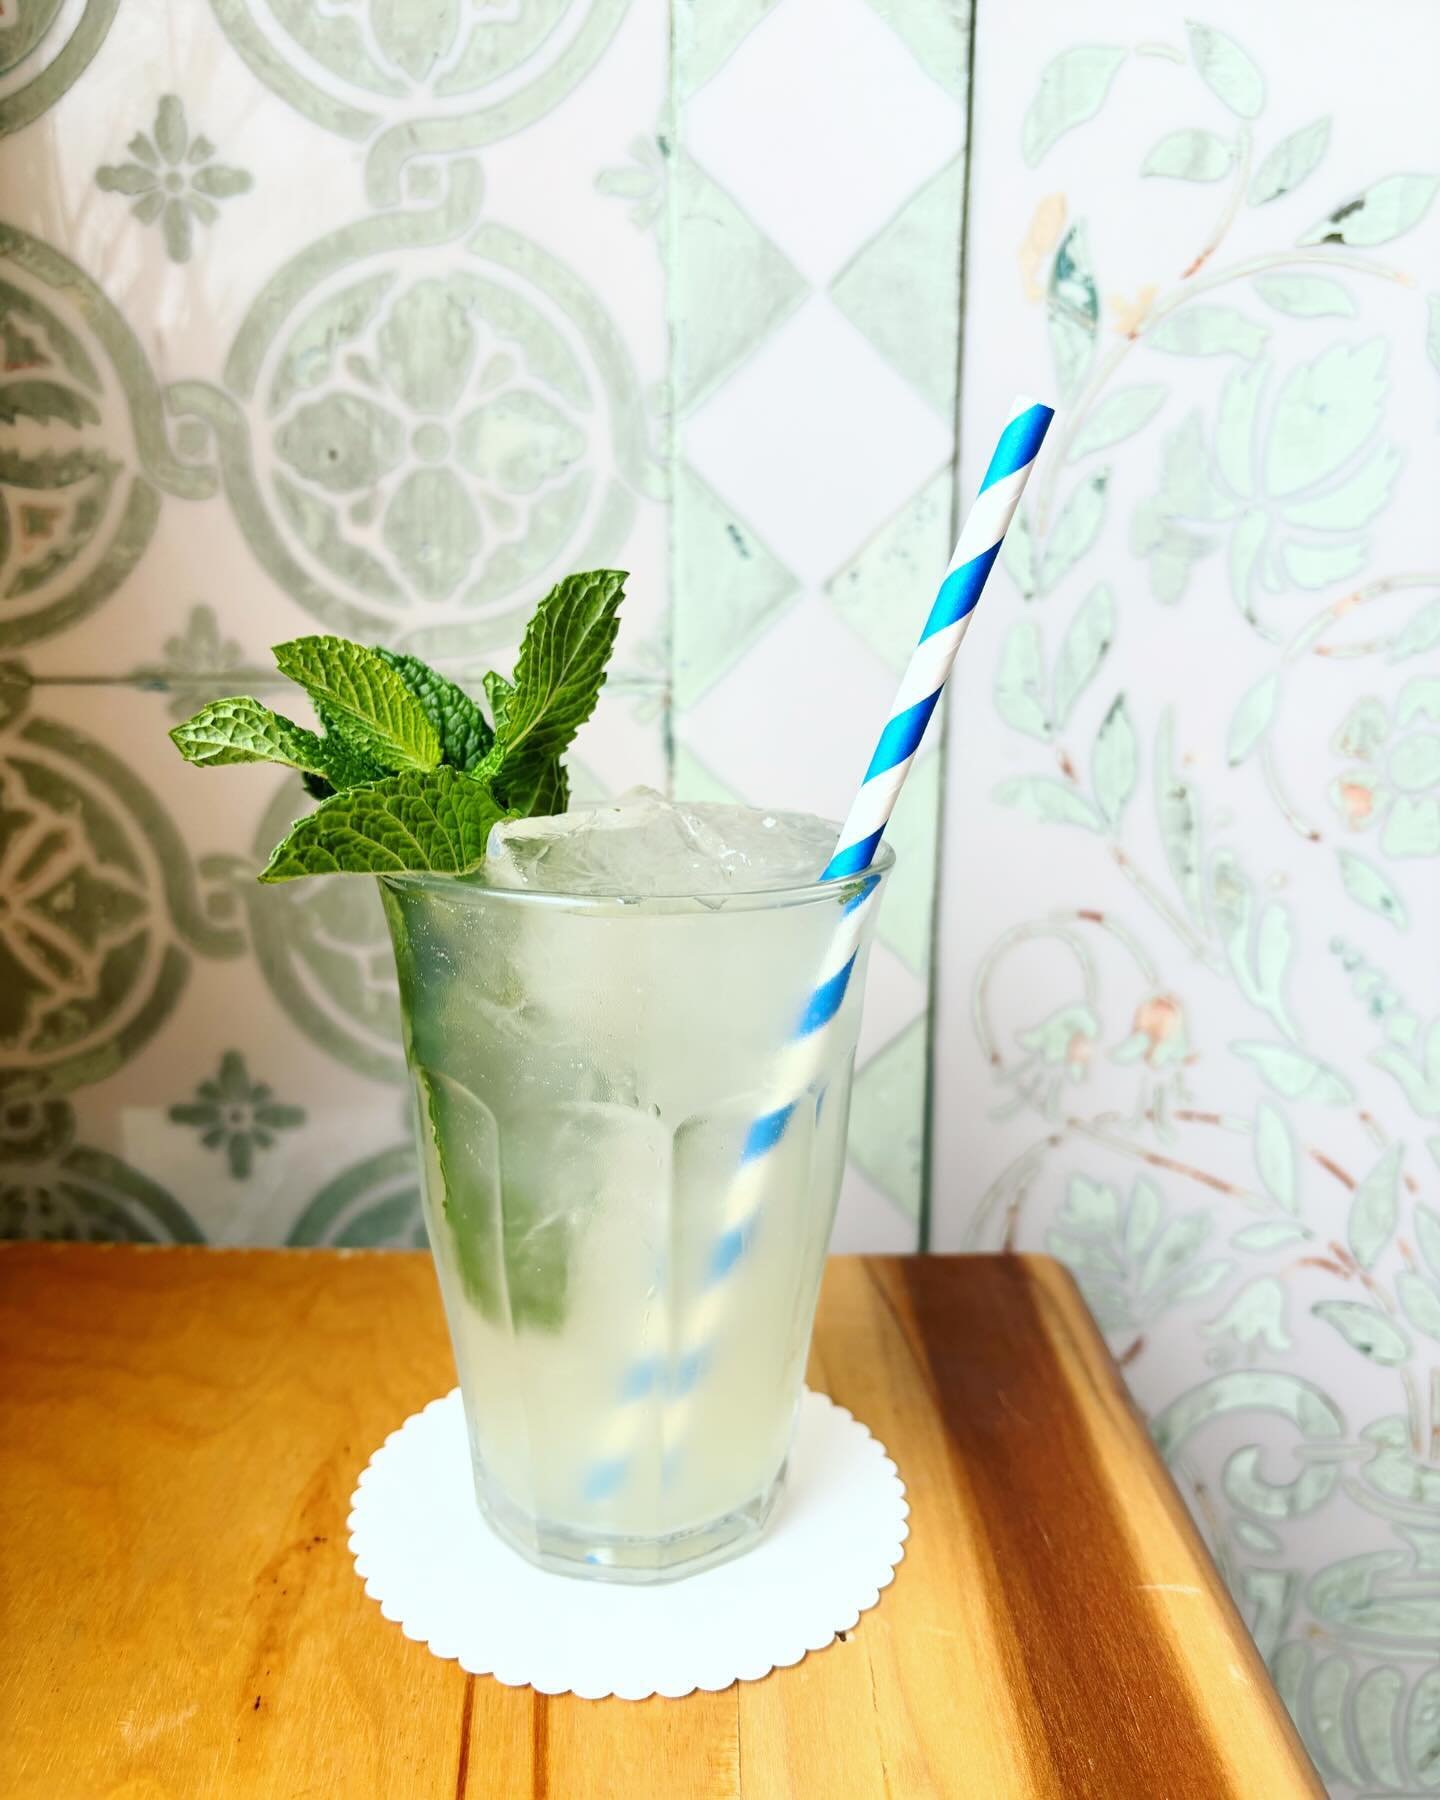 SPRUCE MOJITO 🌲🌱 it&rsquo;s dangerously refreshing

We infuse white rum with fresh spruce tips for 48 hours, make a syrup from more spruce tips, muddle it all with fresh mint, shake it with fresh lime juice, and top it with soda. 

@clevelandmagazi